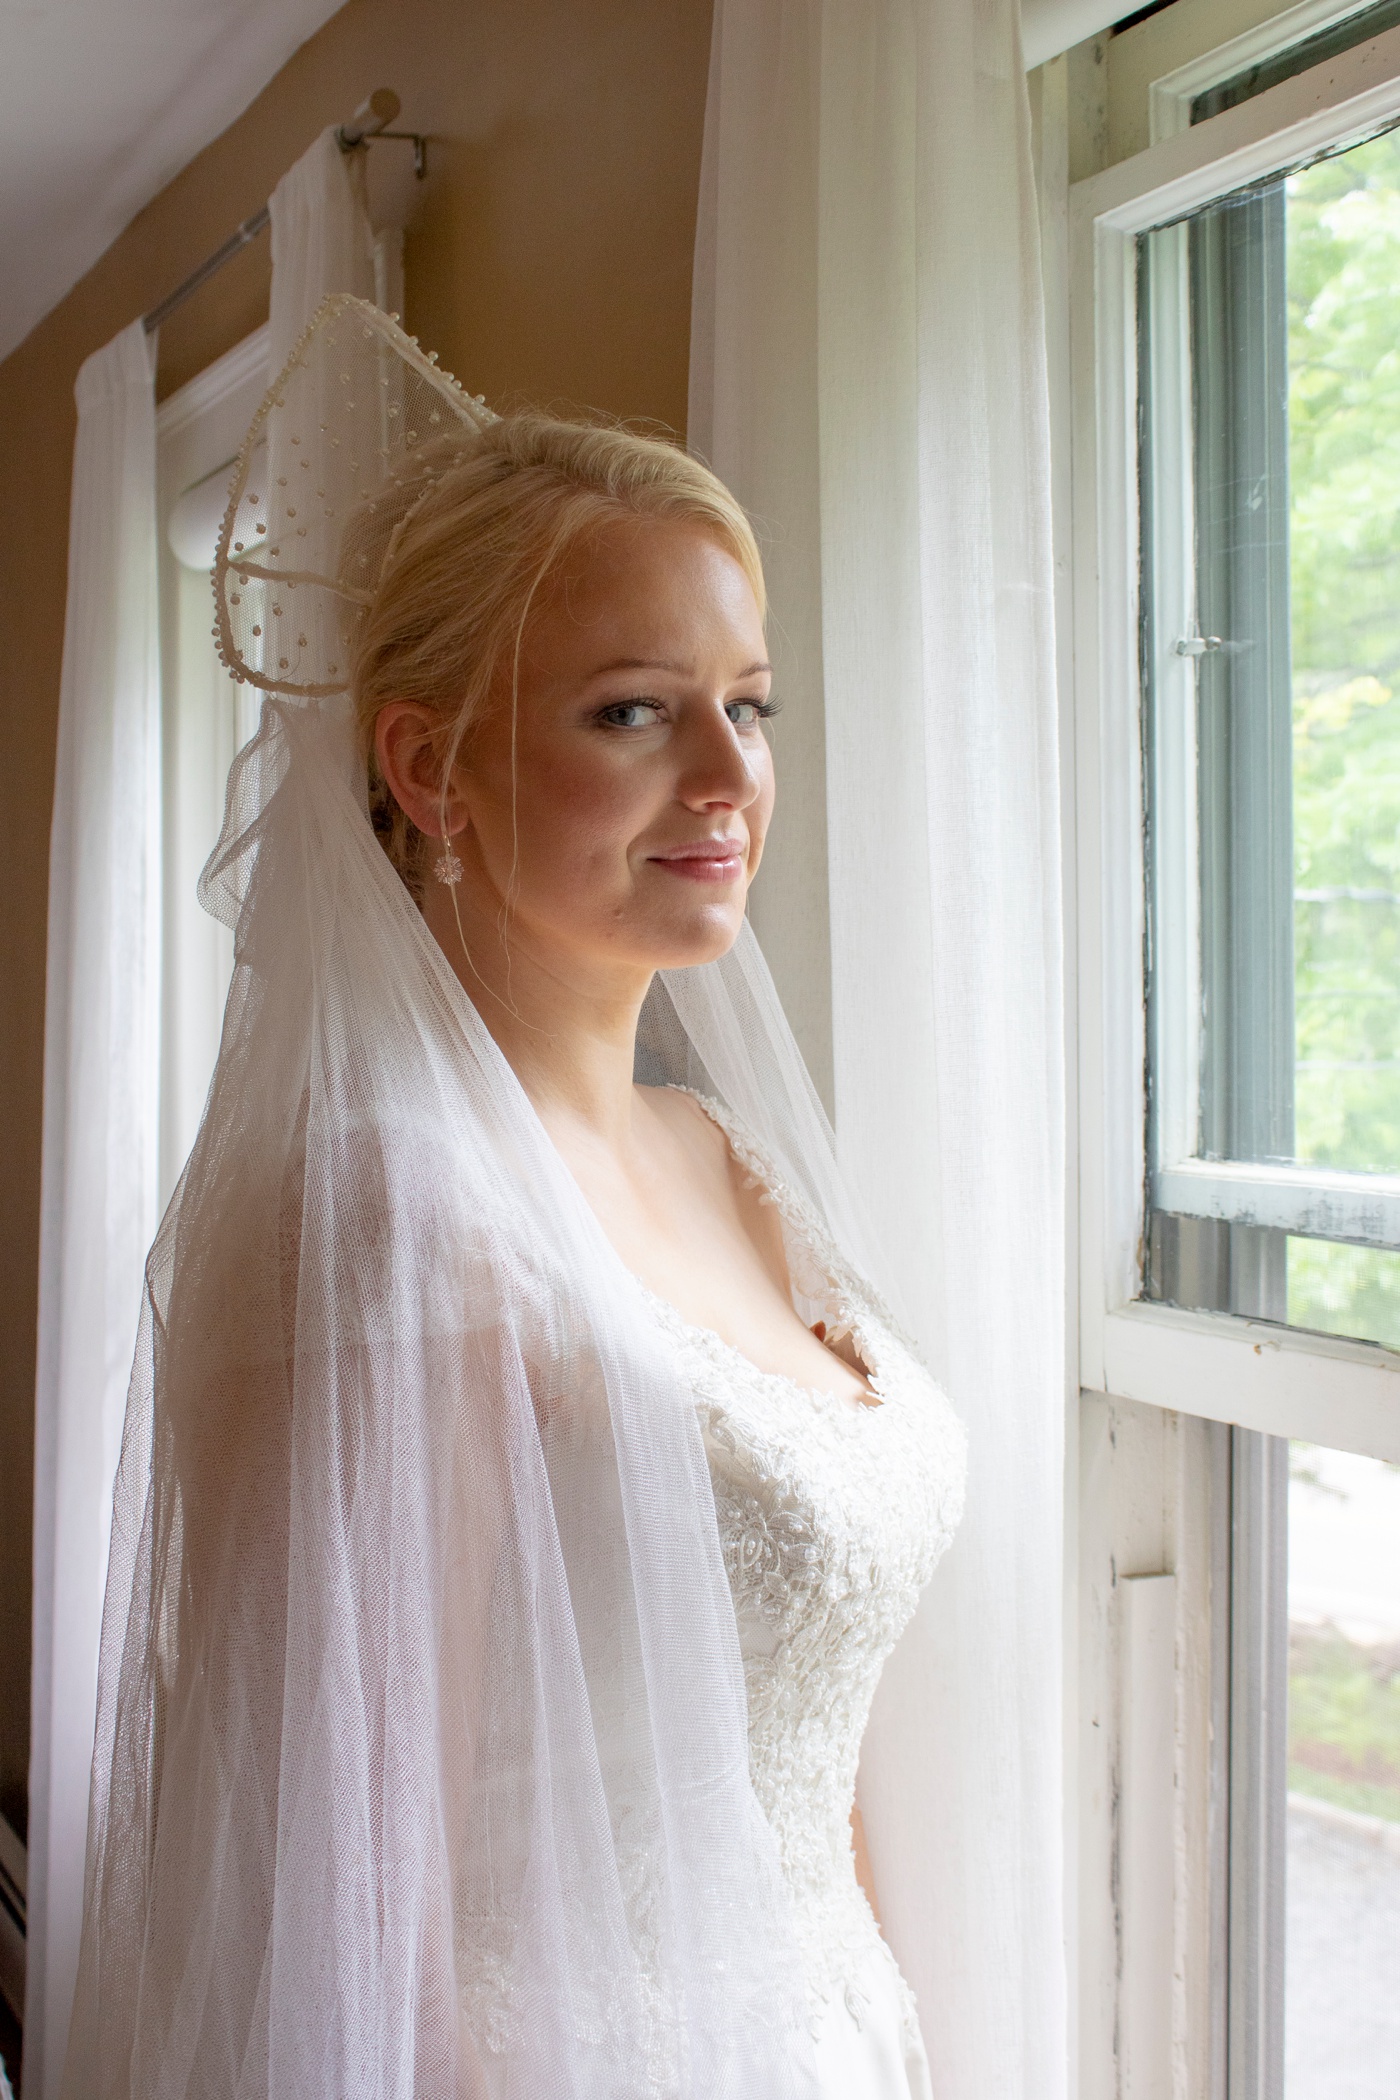 Bride getting ready at her family home in New England